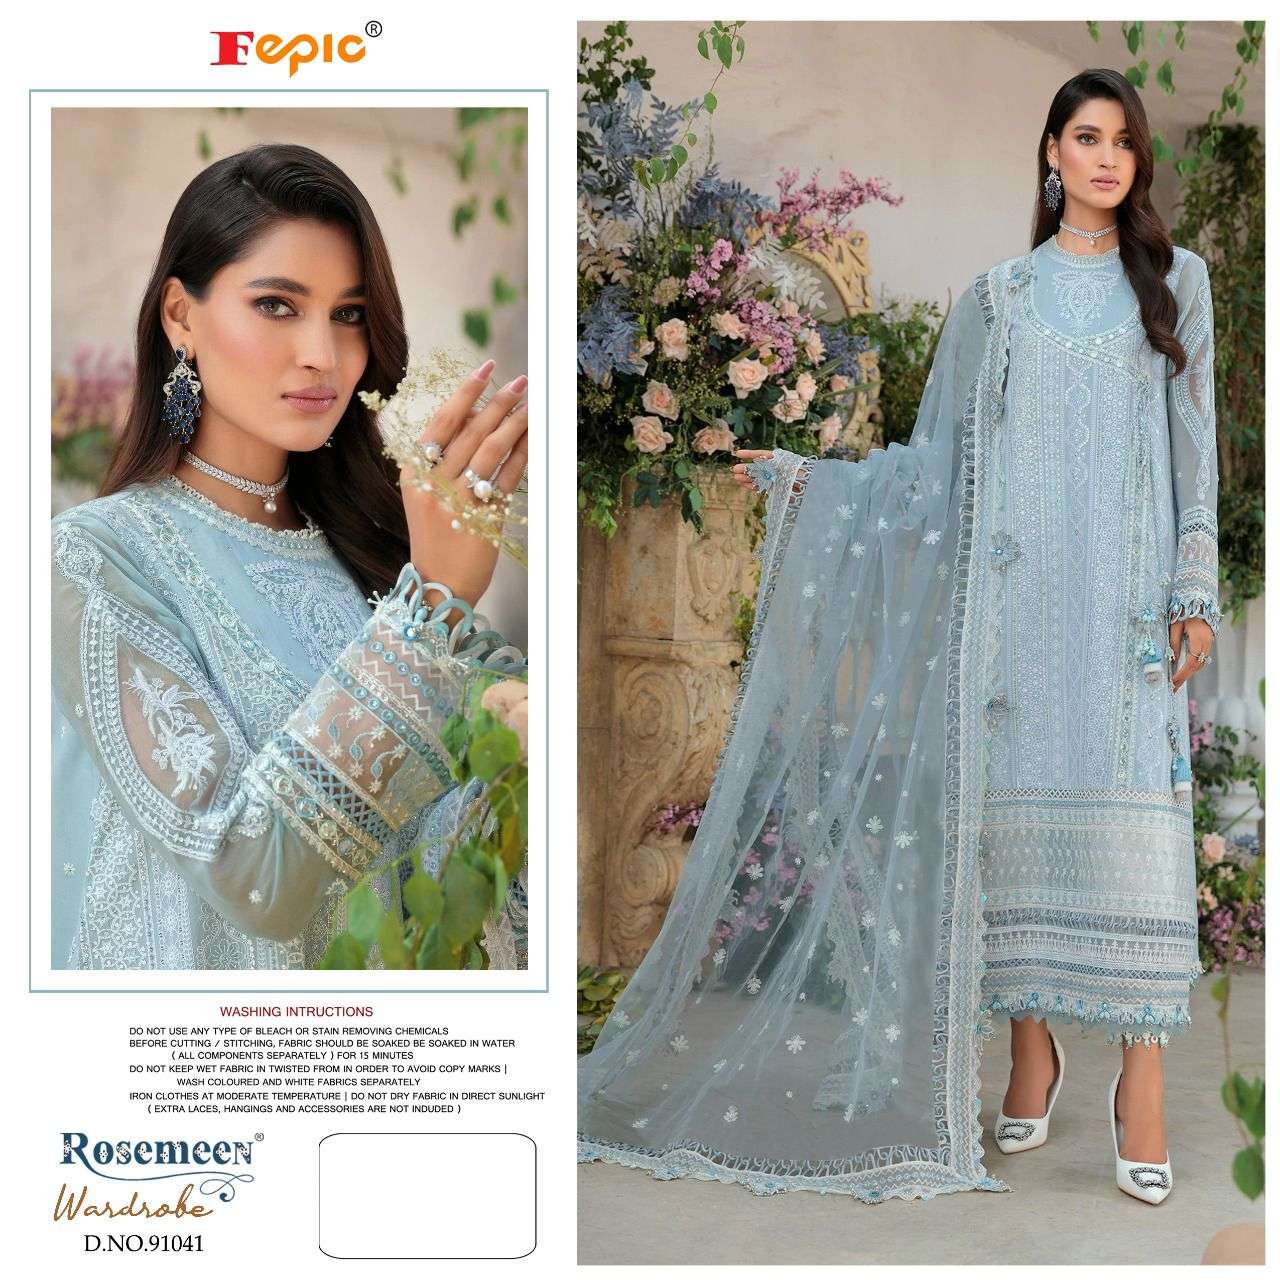 FEPIC ROSEMEEN WARDROBE DESIGNER FAUX GEORGETTE AND BUTTERFLY NET EMBROIDERED PARTY WEAR SUITS IN WHOLESALE RATE 